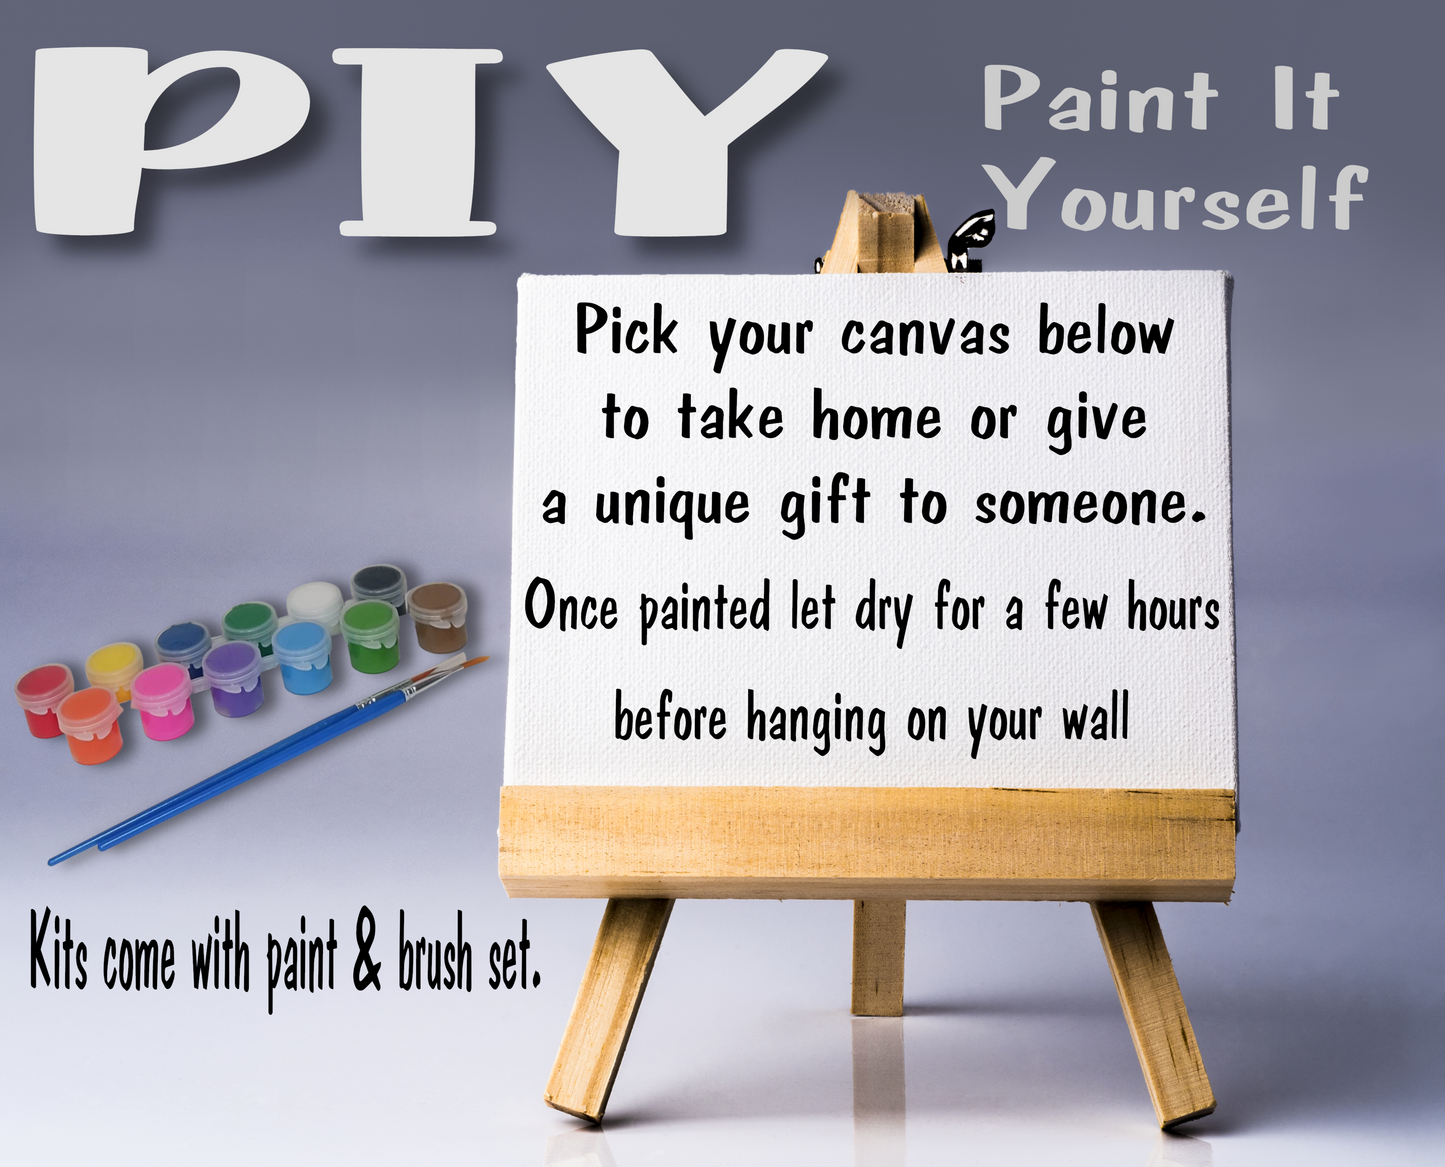 PIY Paint It Yourself Canvas